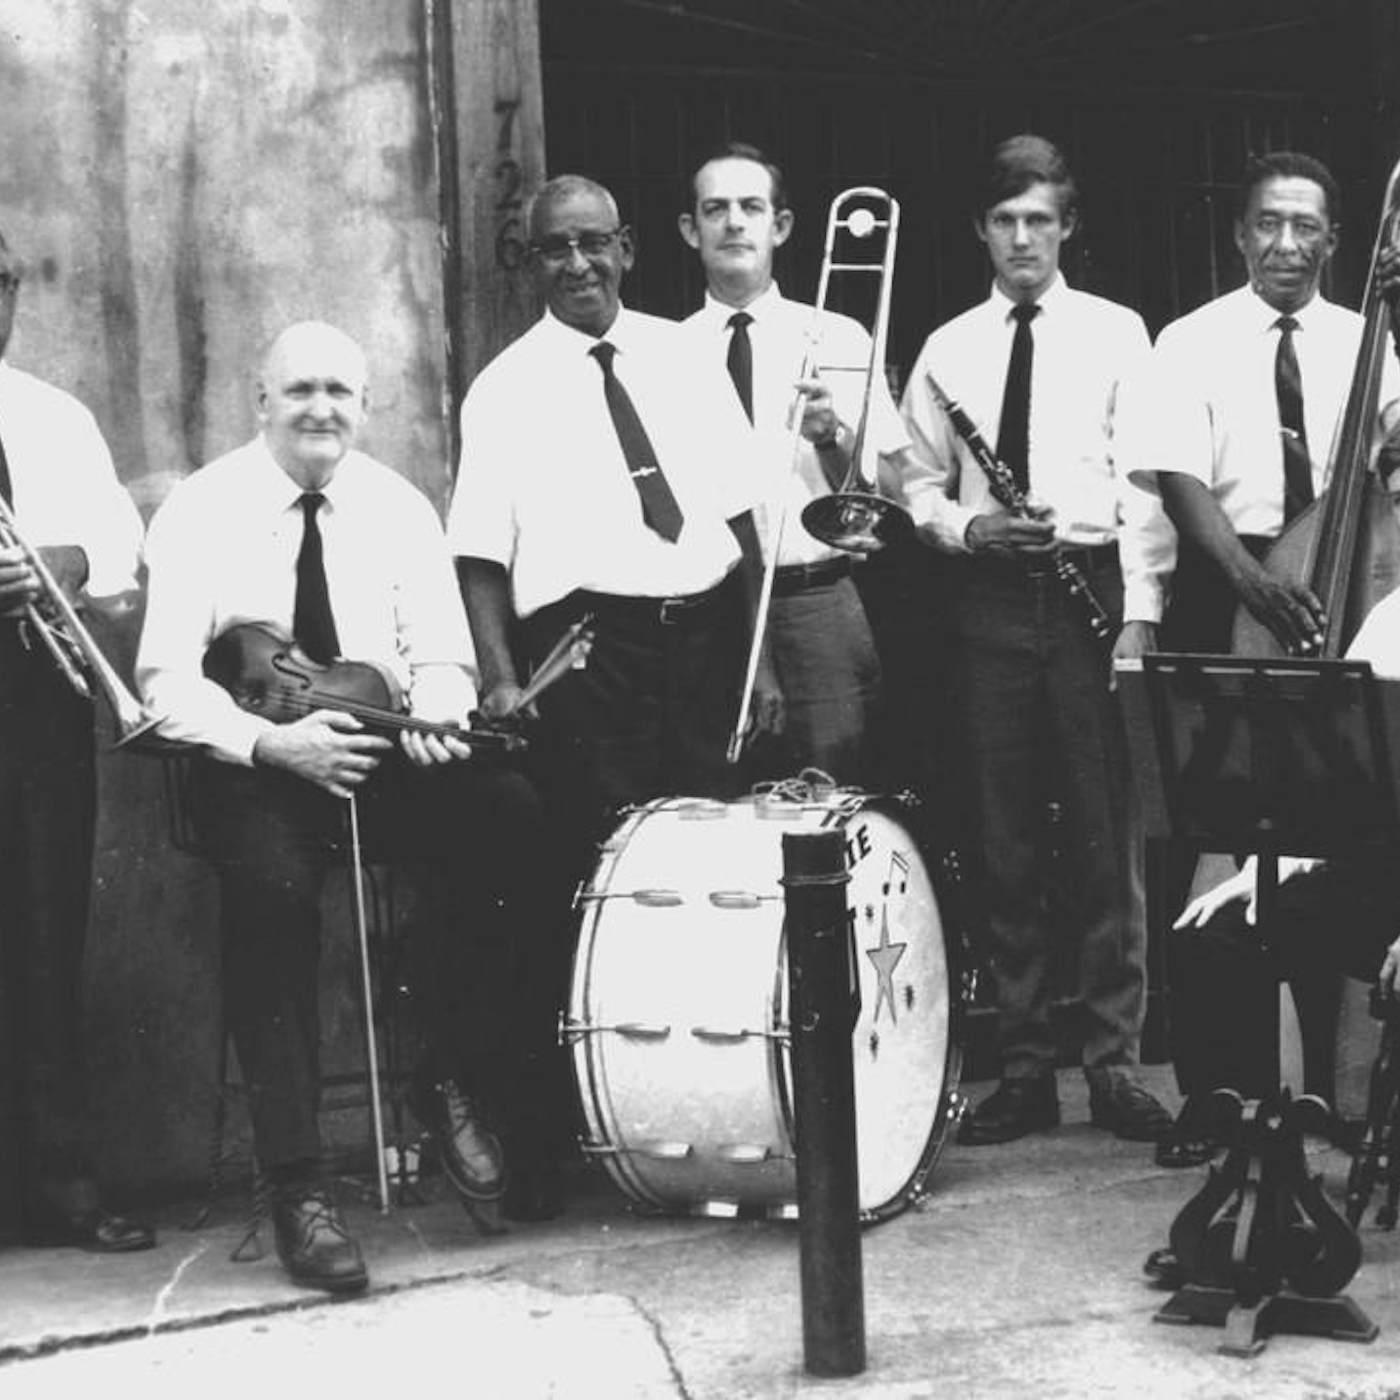 The New Orleans Ragtime Orchestra